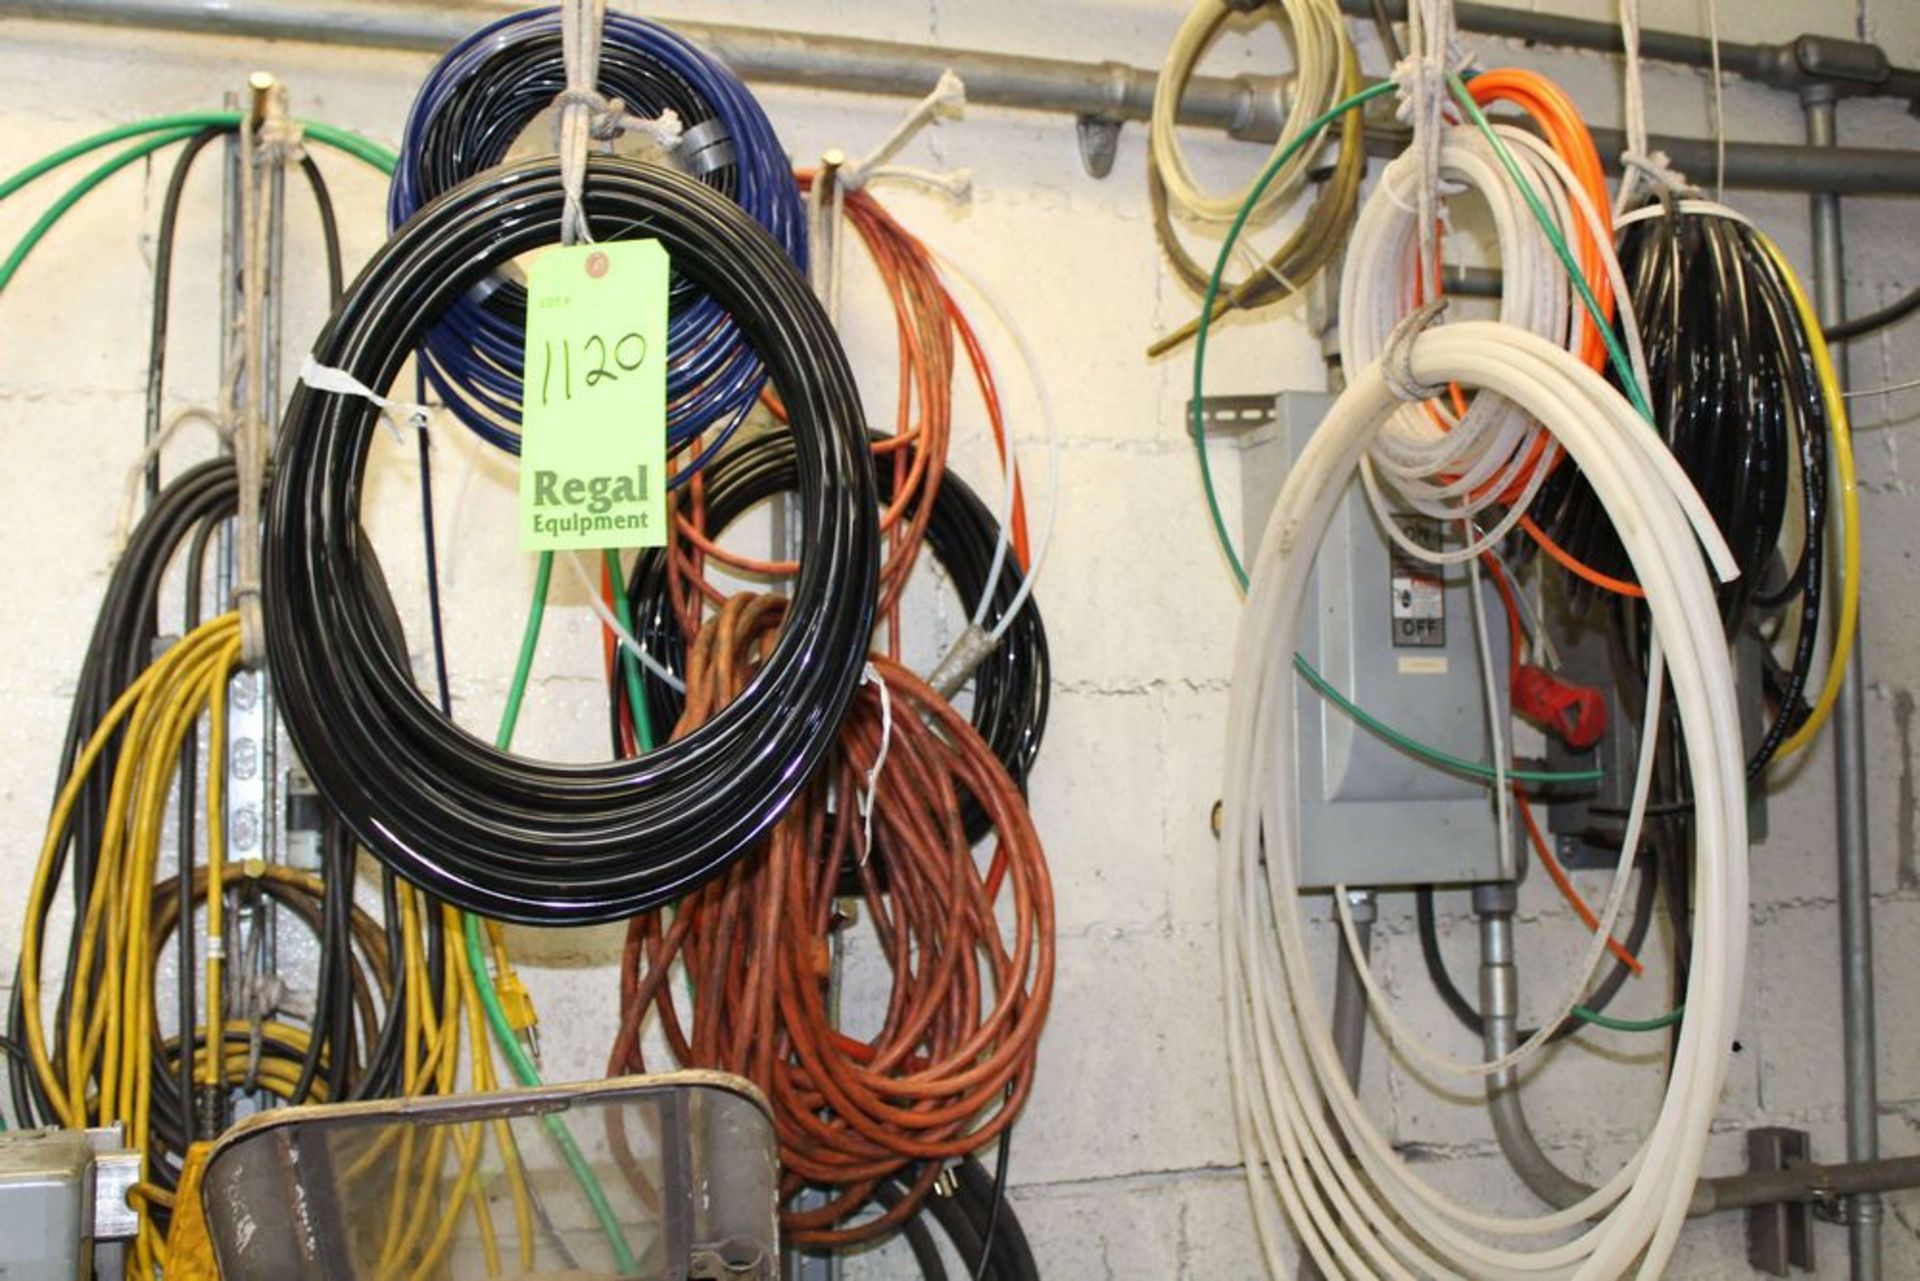 Assorted Hoses and Power Cords